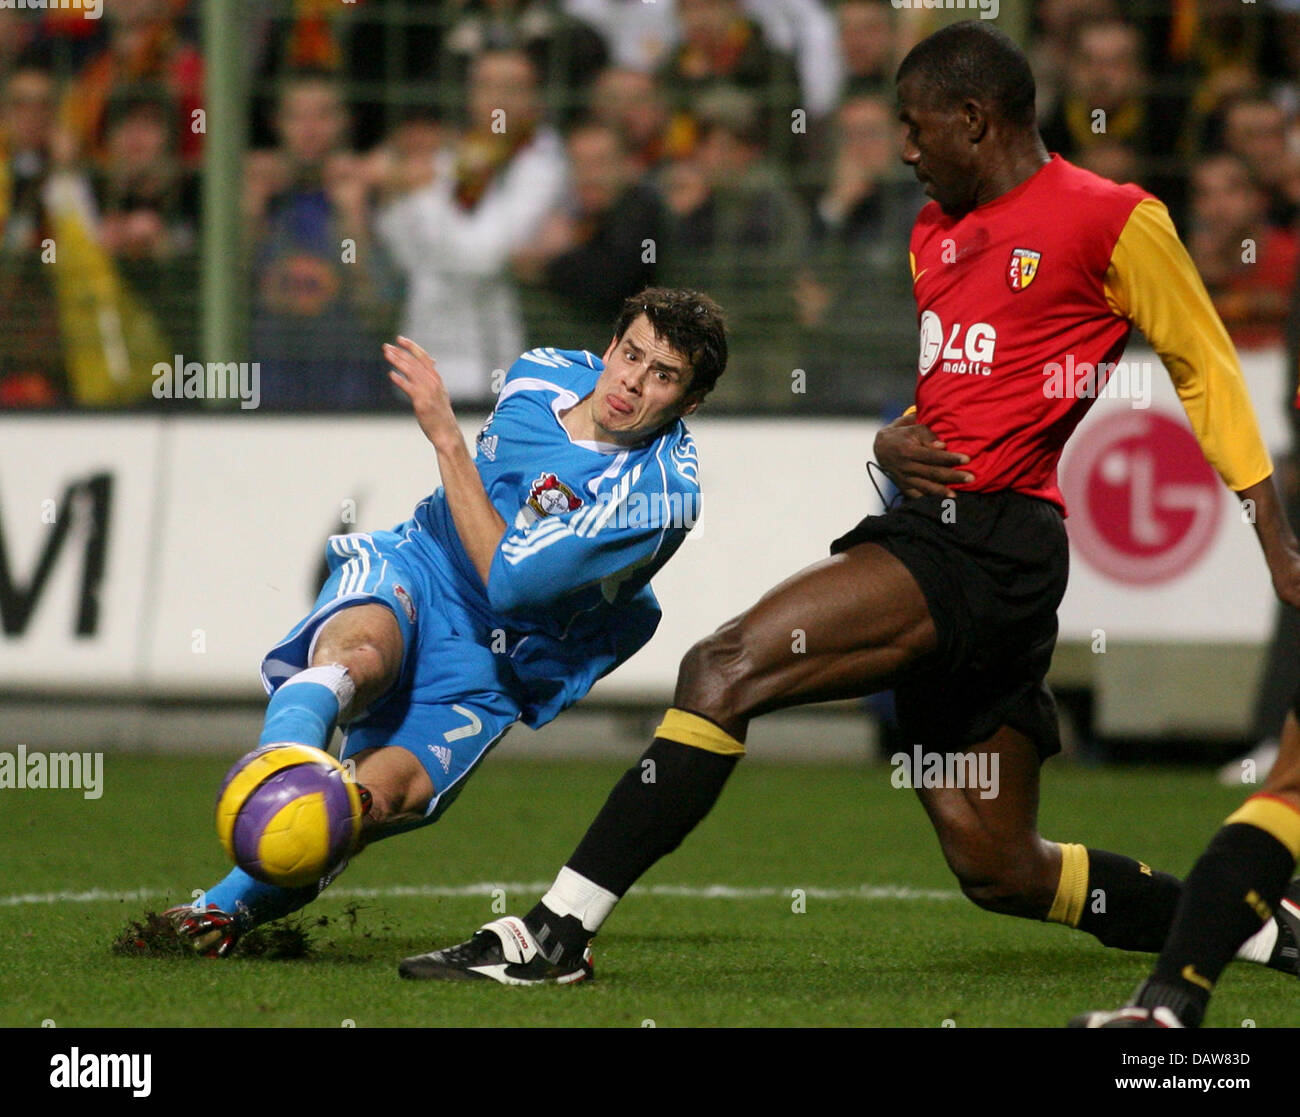 Tranqillo Barnetta (L) of Leverkusen and Adama Coulibaly of Lens vie for the ball during the UEFA Cup match RC Lens vs Bayer 04 Leverkusen at Félix-Bollaert Stadium in Lens, France, Thursday 08 March 2007. Leverkusen lost to Lens by 1-2. Photo: Felix Heyder Stock Photo